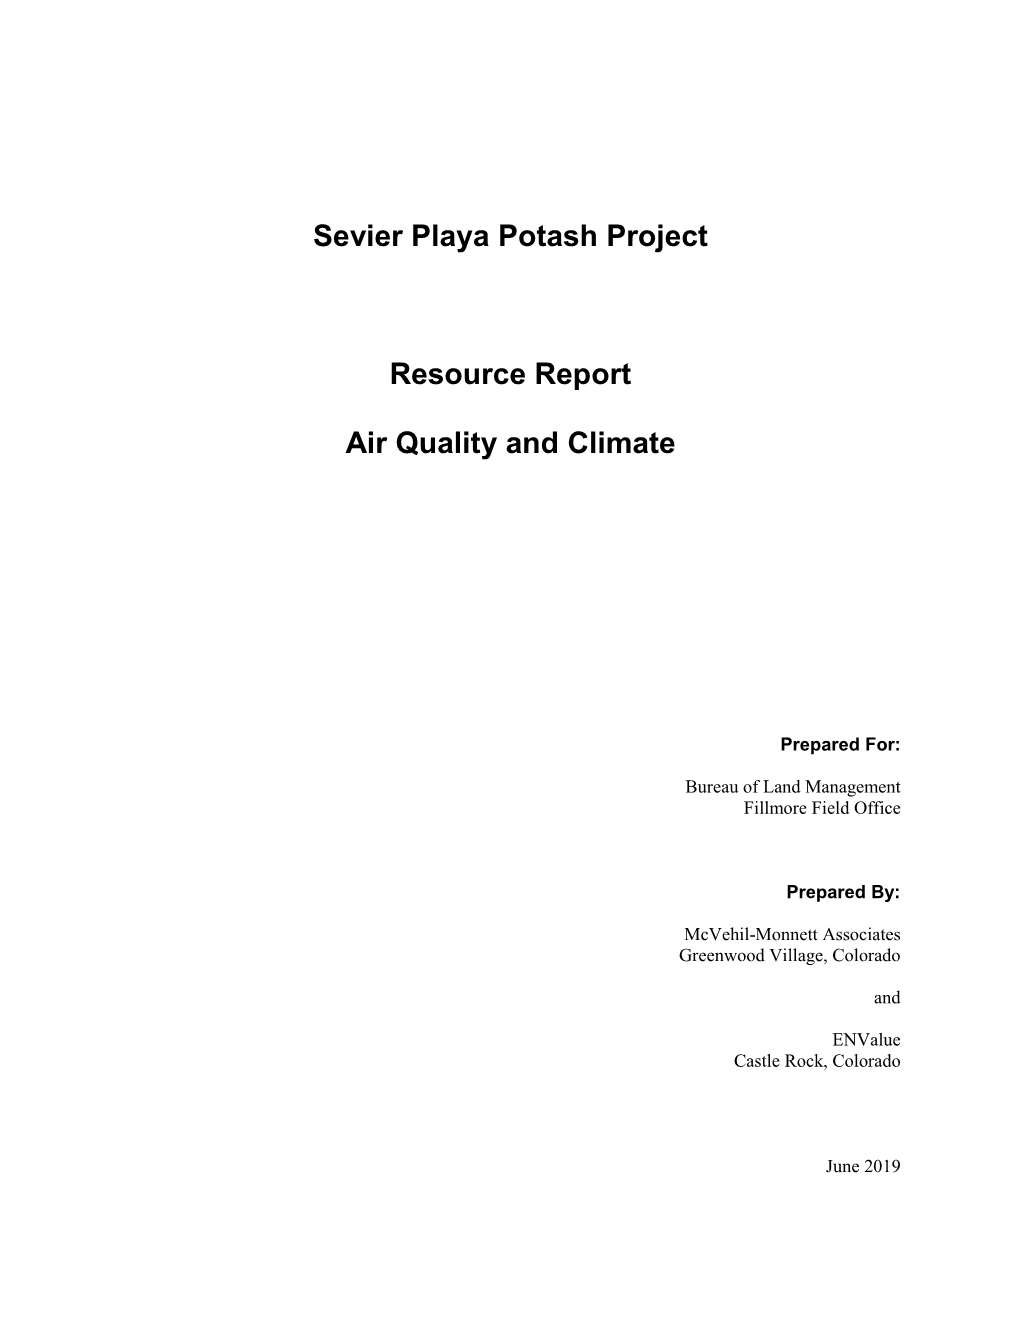 Sevier Playa Potash Project Resource Report Air Quality and Climate